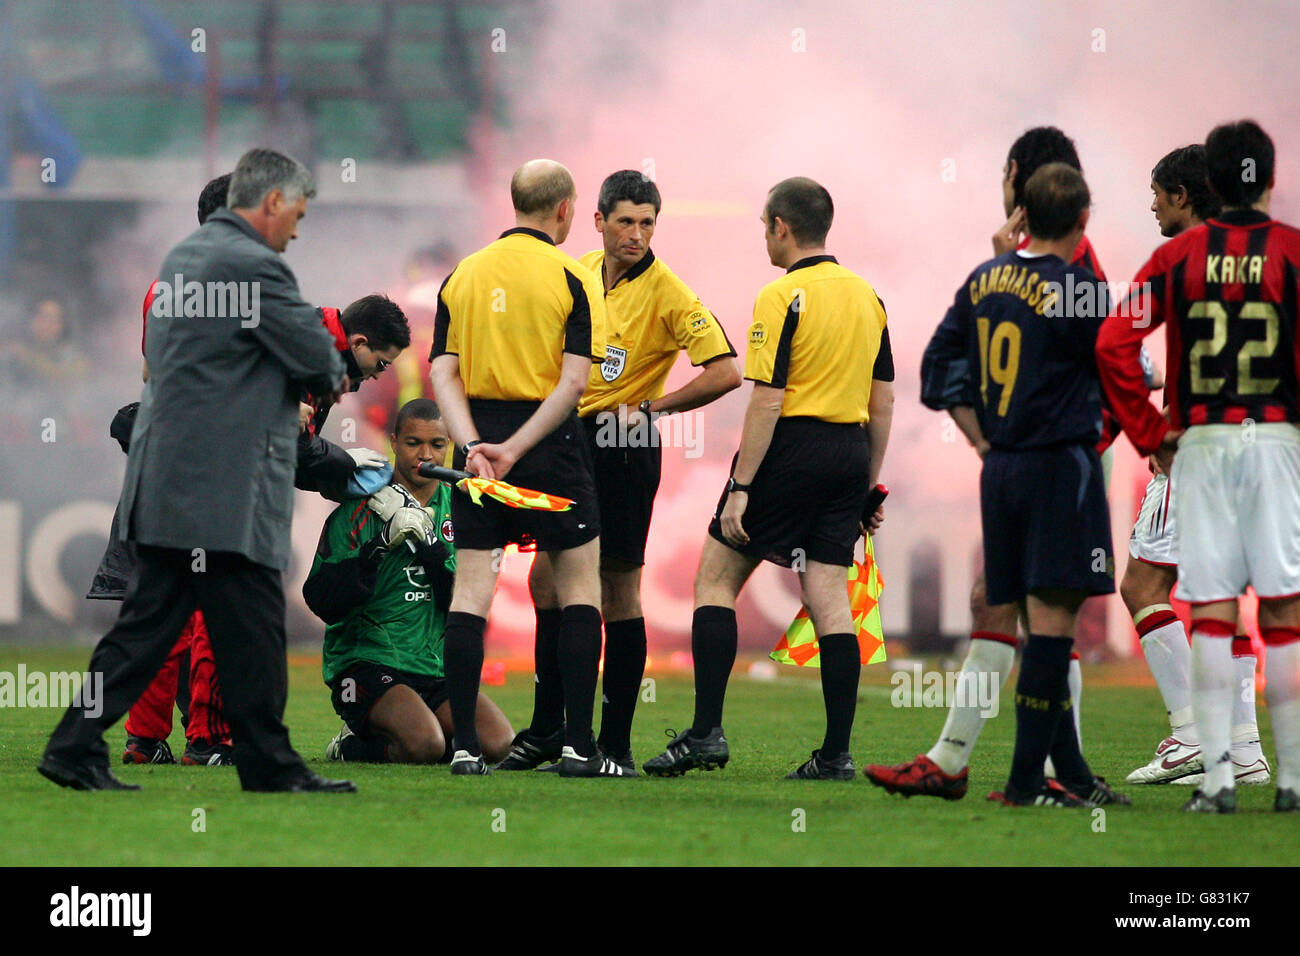 https://c8.alamy.com/comp/G831K7/referee-markus-merk-decides-to-take-the-players-off-the-field-after-G831K7.jpg